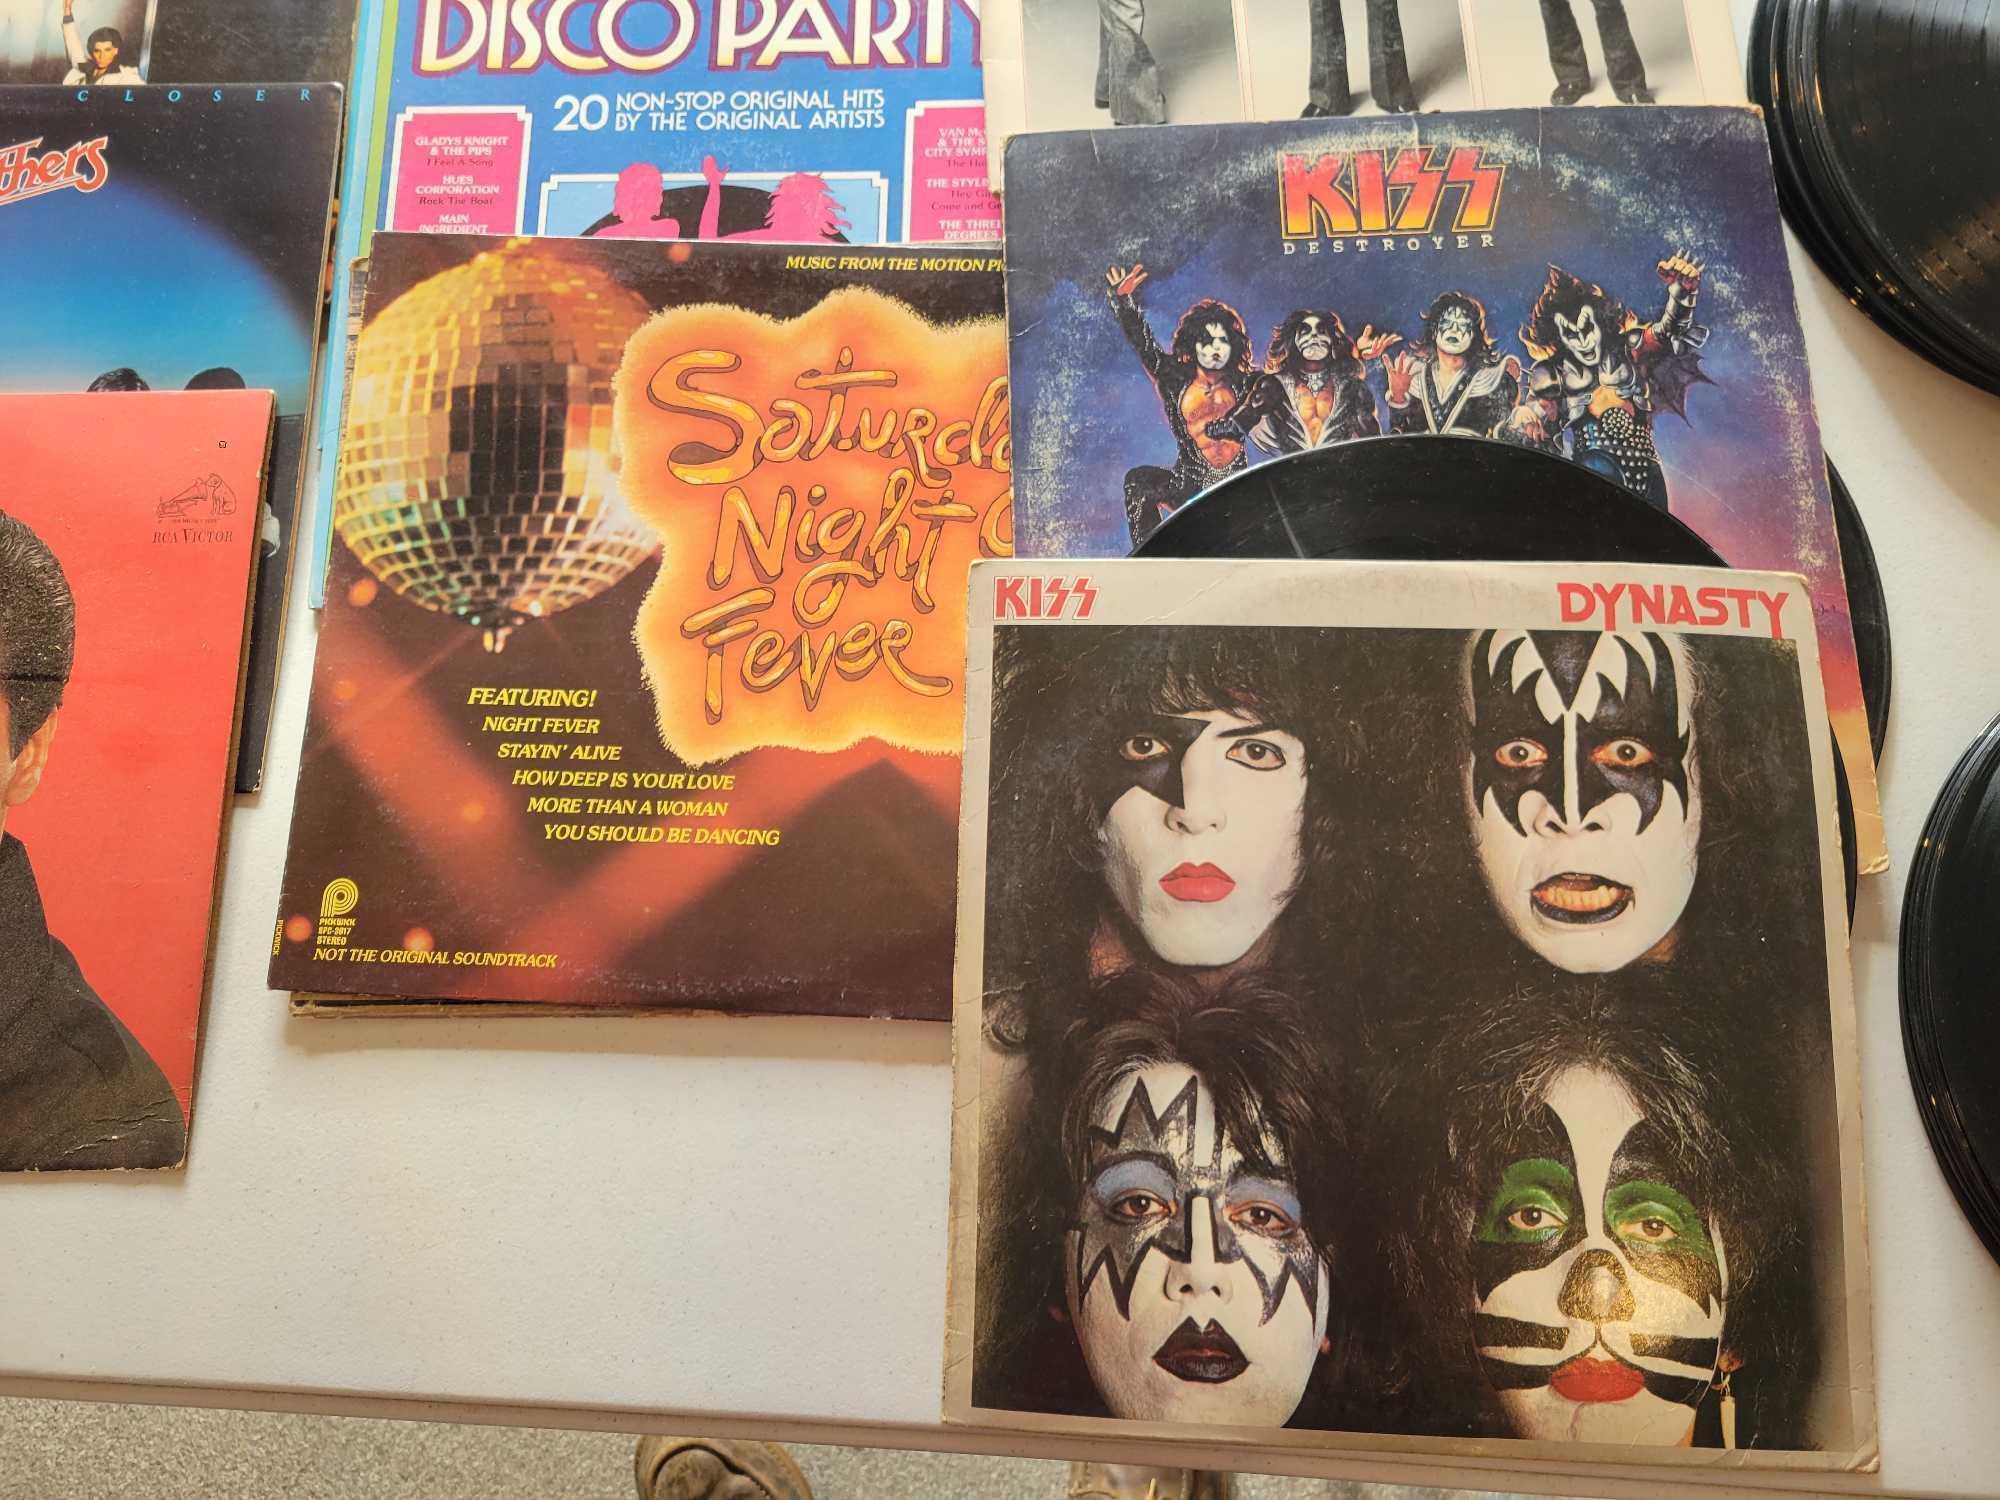 Group of vintage LPs and albums, Bee Gees picture album, Kiss, Doobie Brothers, Elvis, Saturday